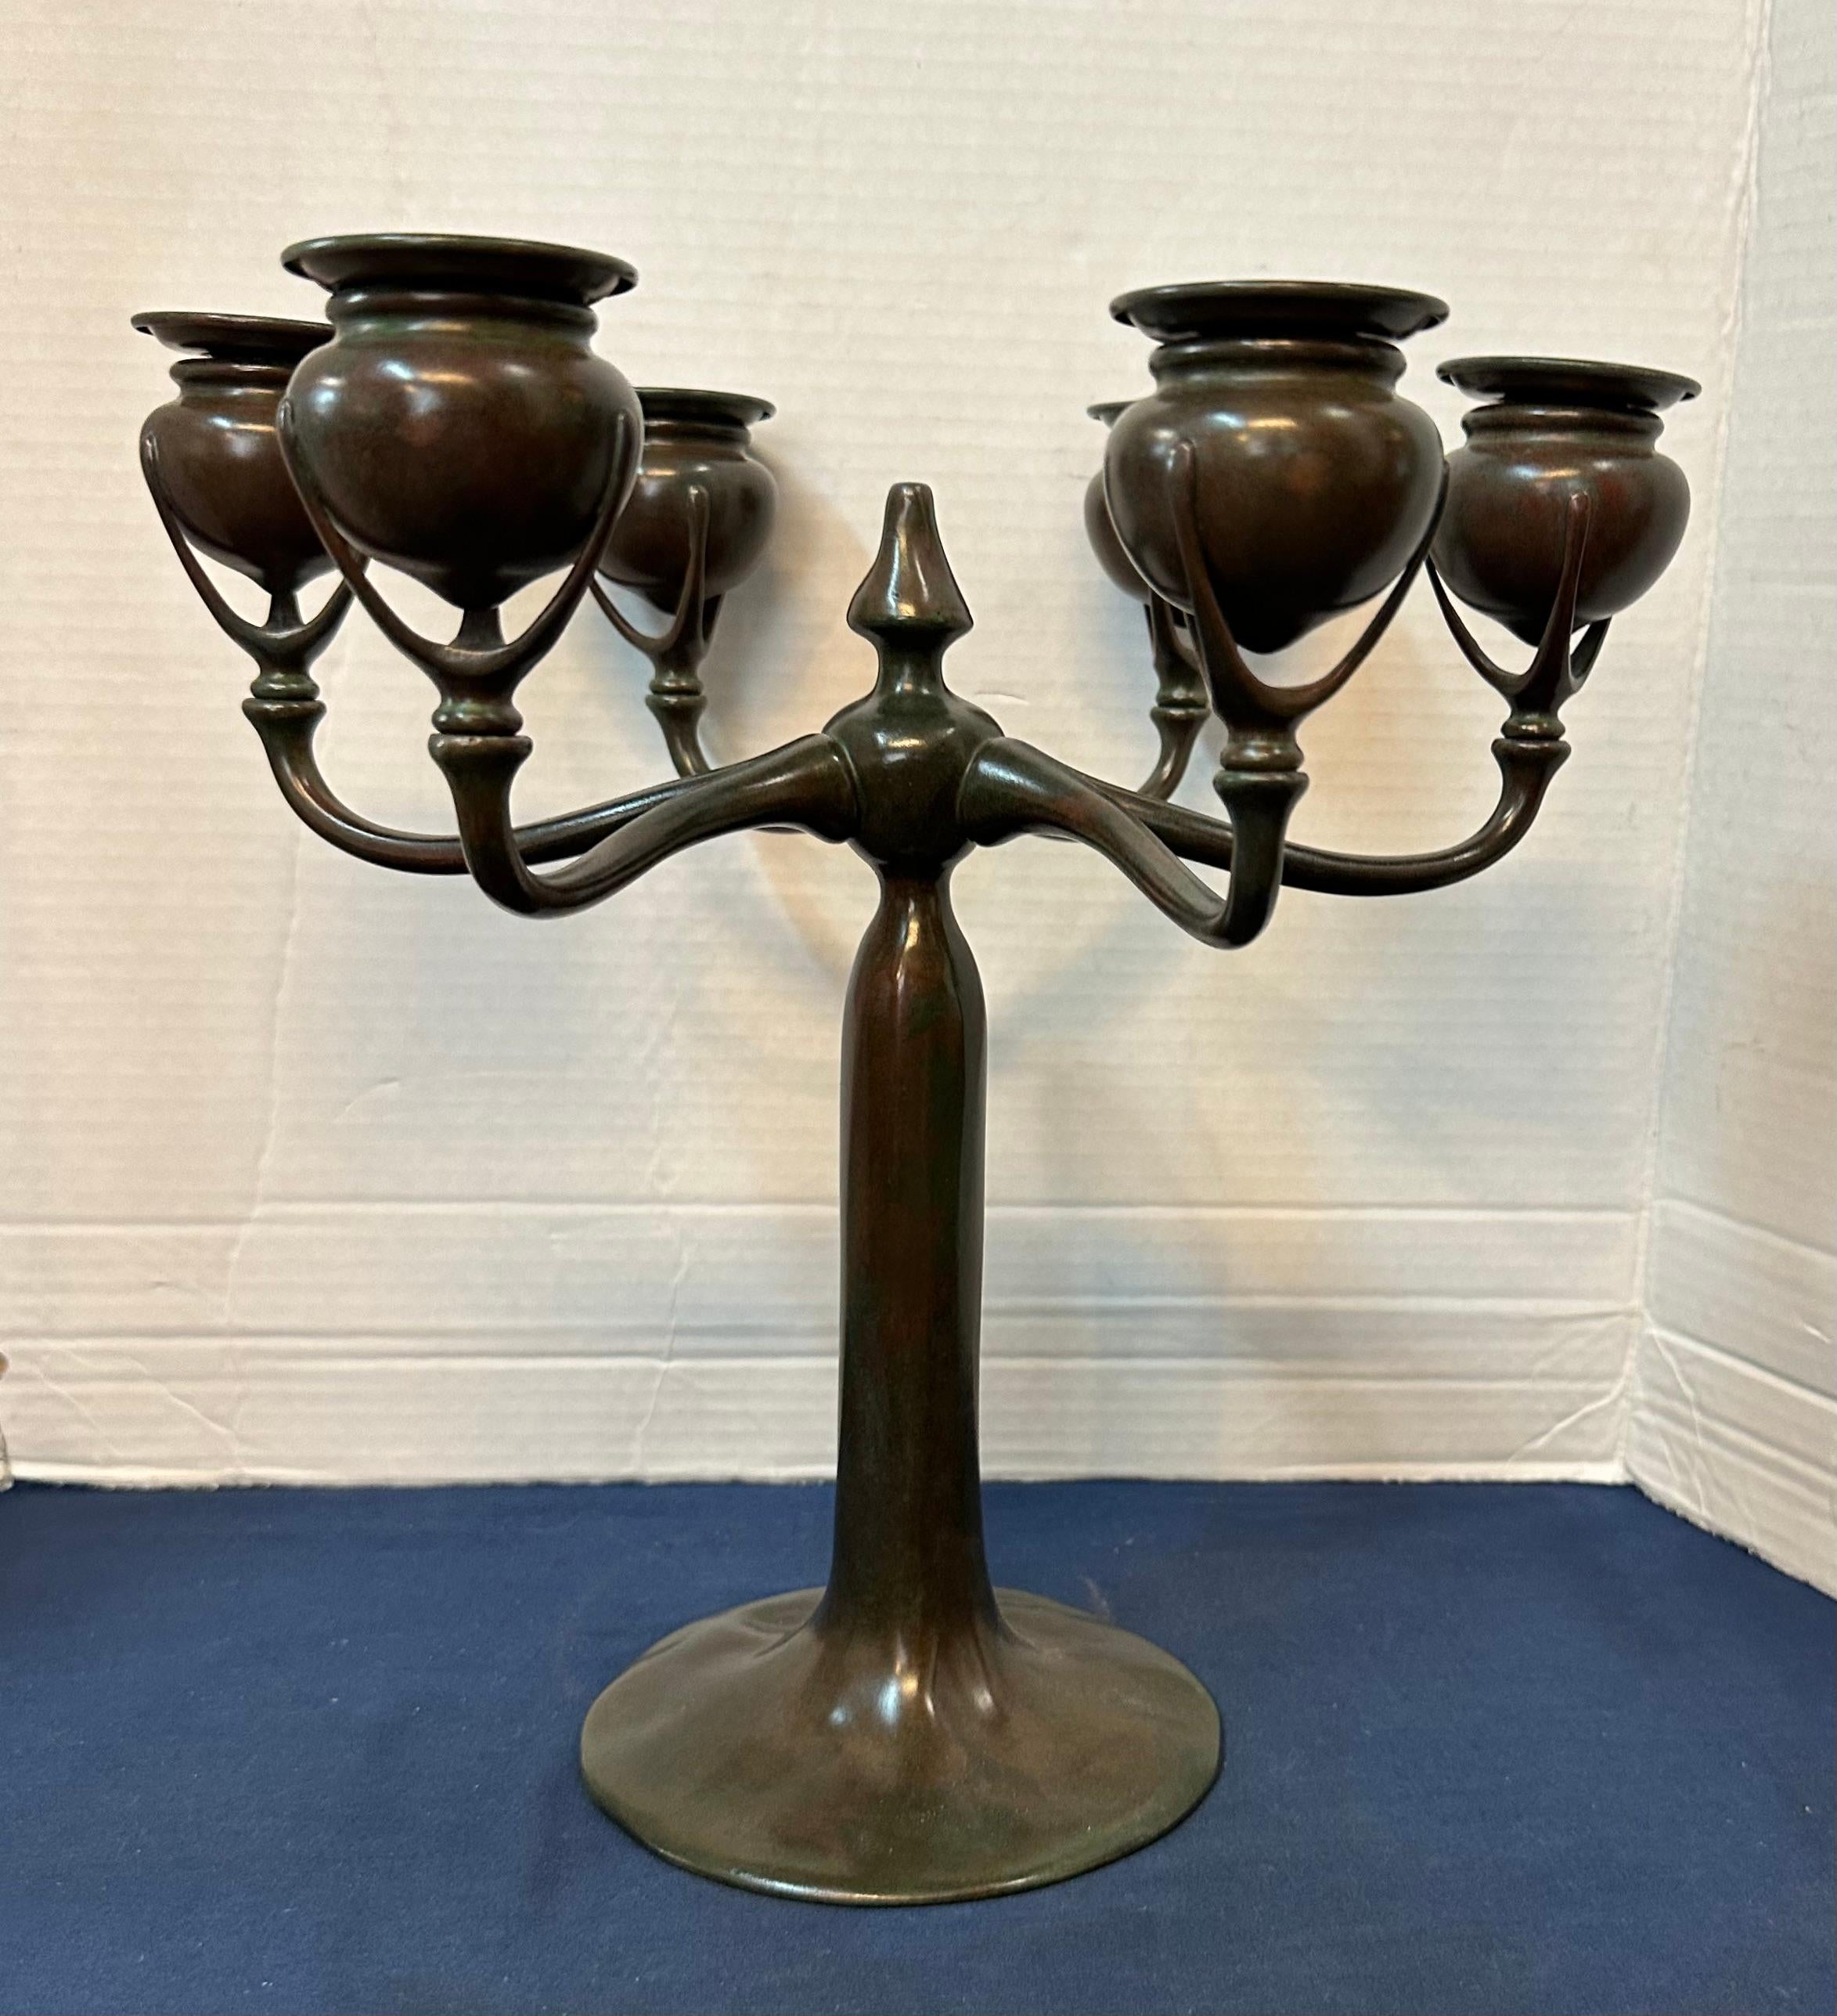 This vintage authentic Tiffany Studios bronze candelabra dates from the early 1920’s. It features six bulbous urn shape candleholders decorating and accenting each extended arm.
The original rich chocolate color patina showcases its overall